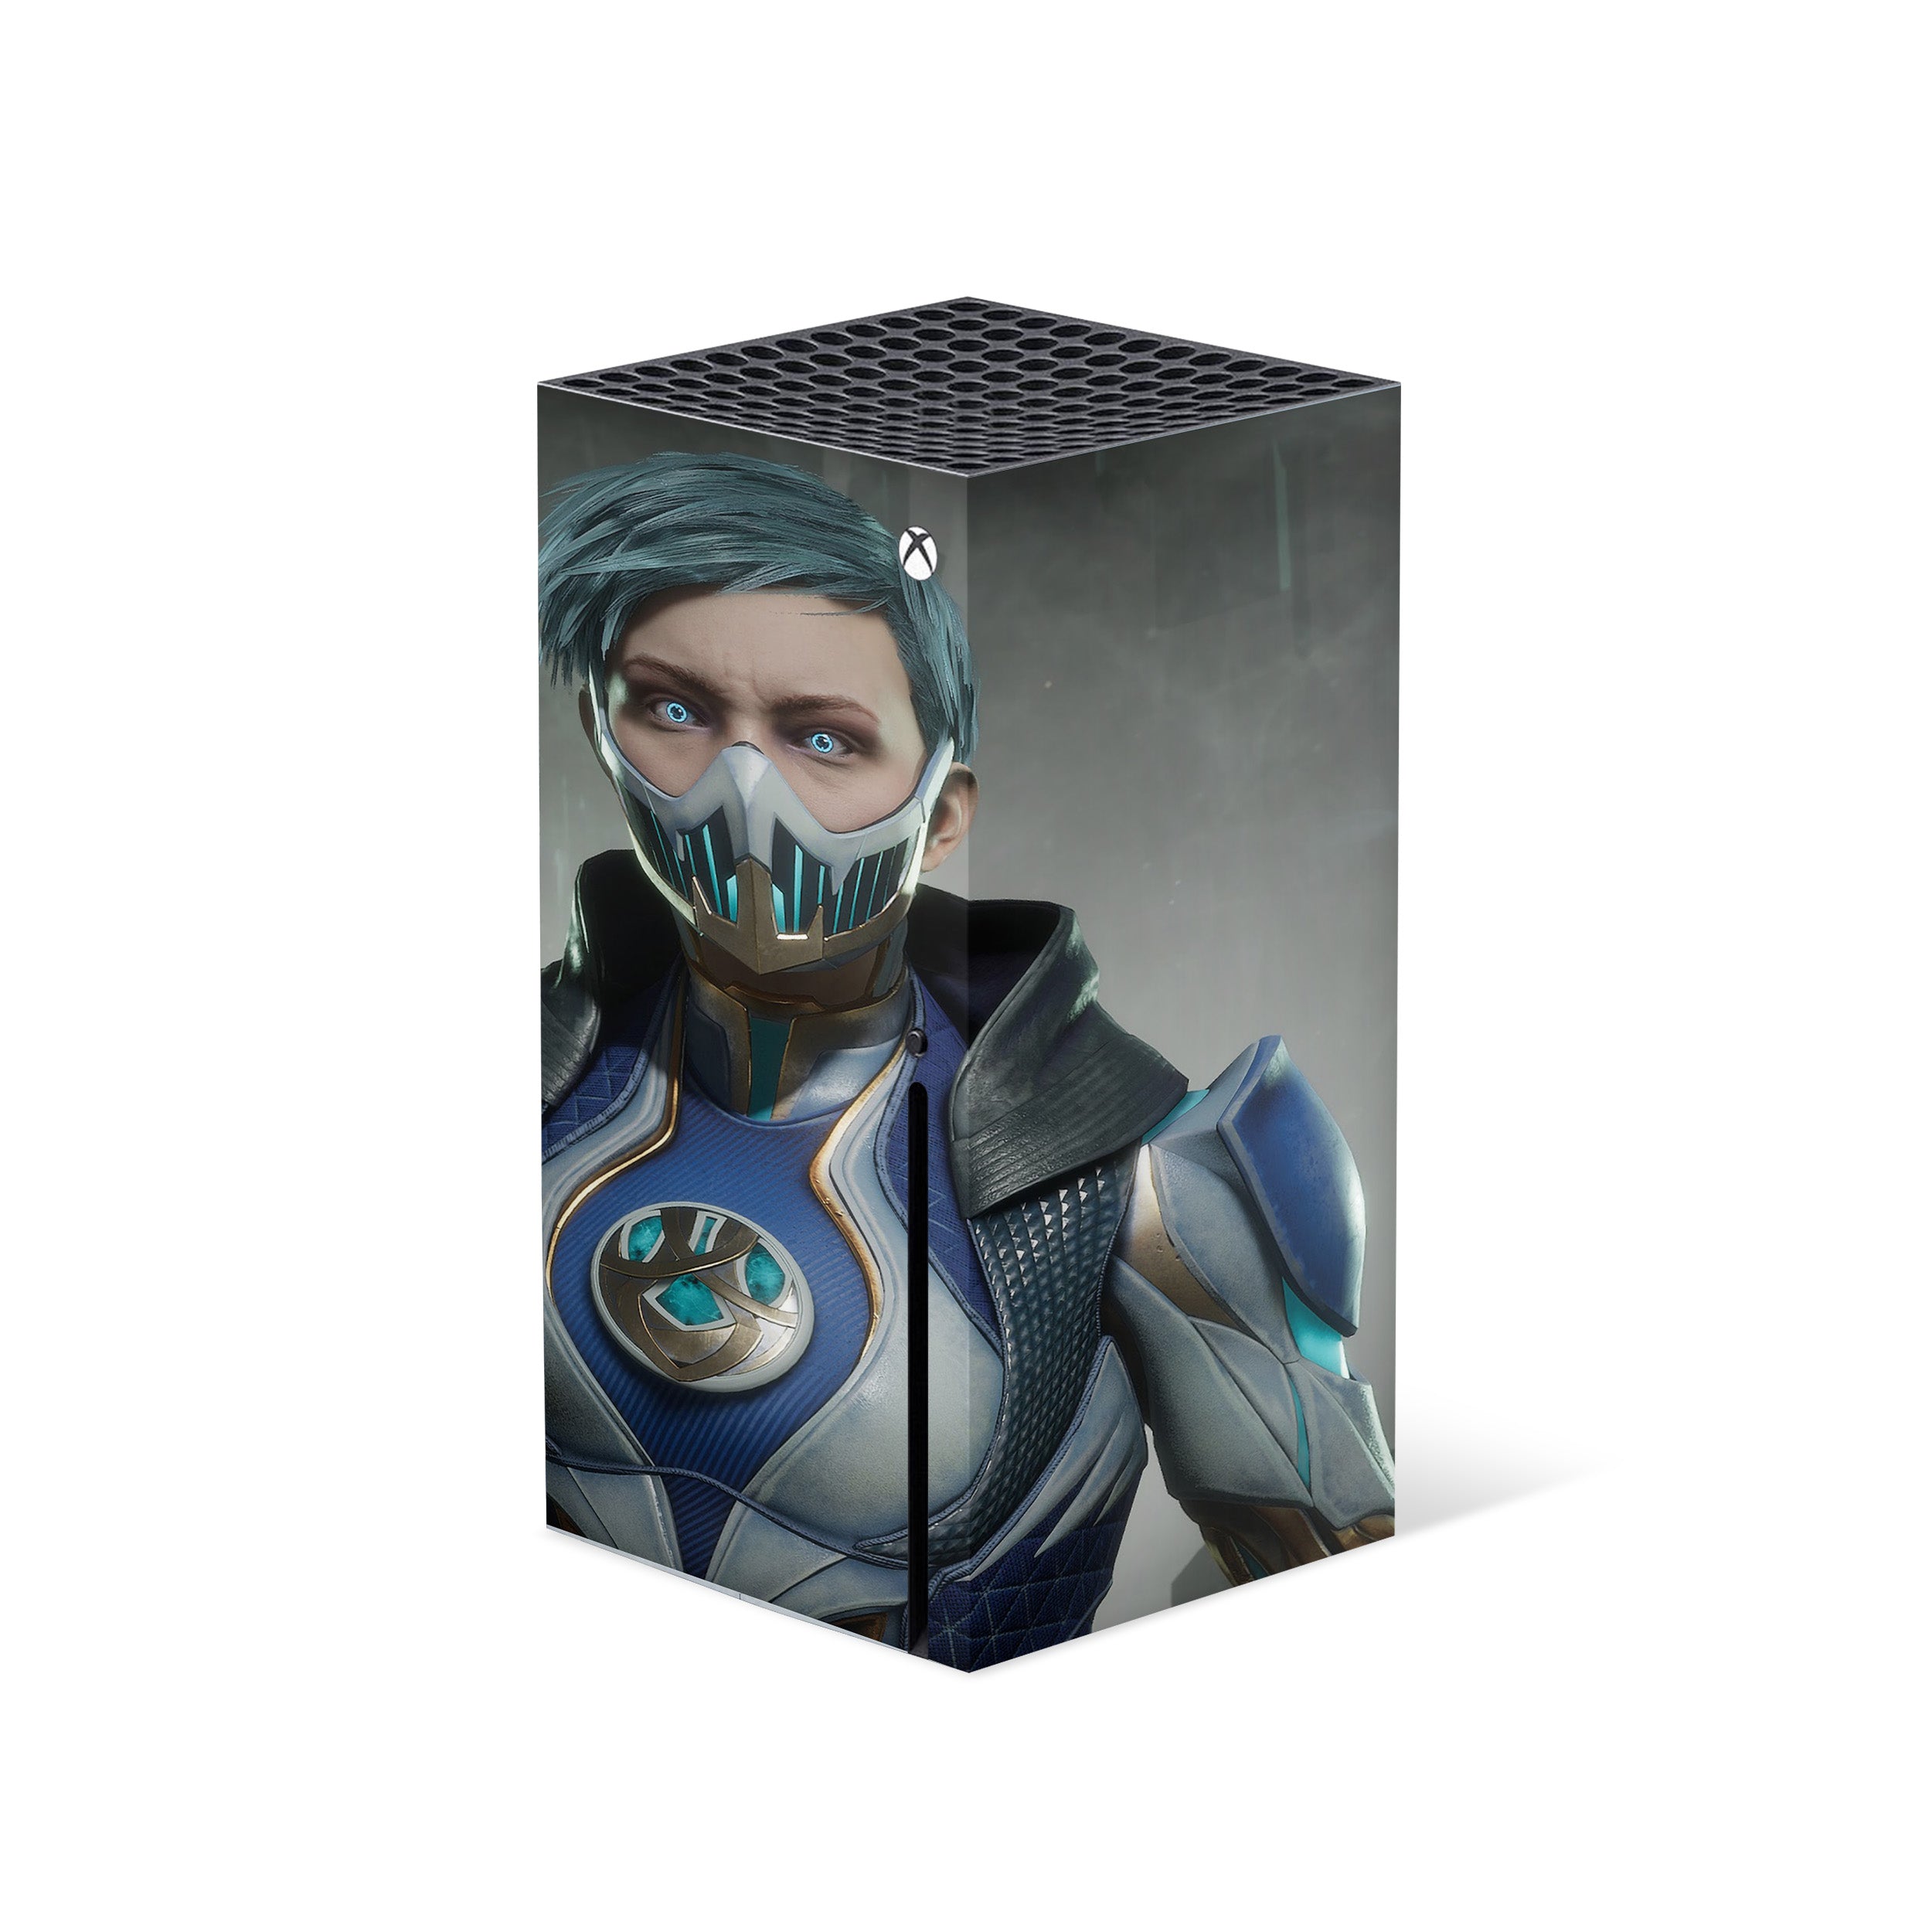 A video game skin featuring a Mortal Kombat 11 design for the Xbox Series X.